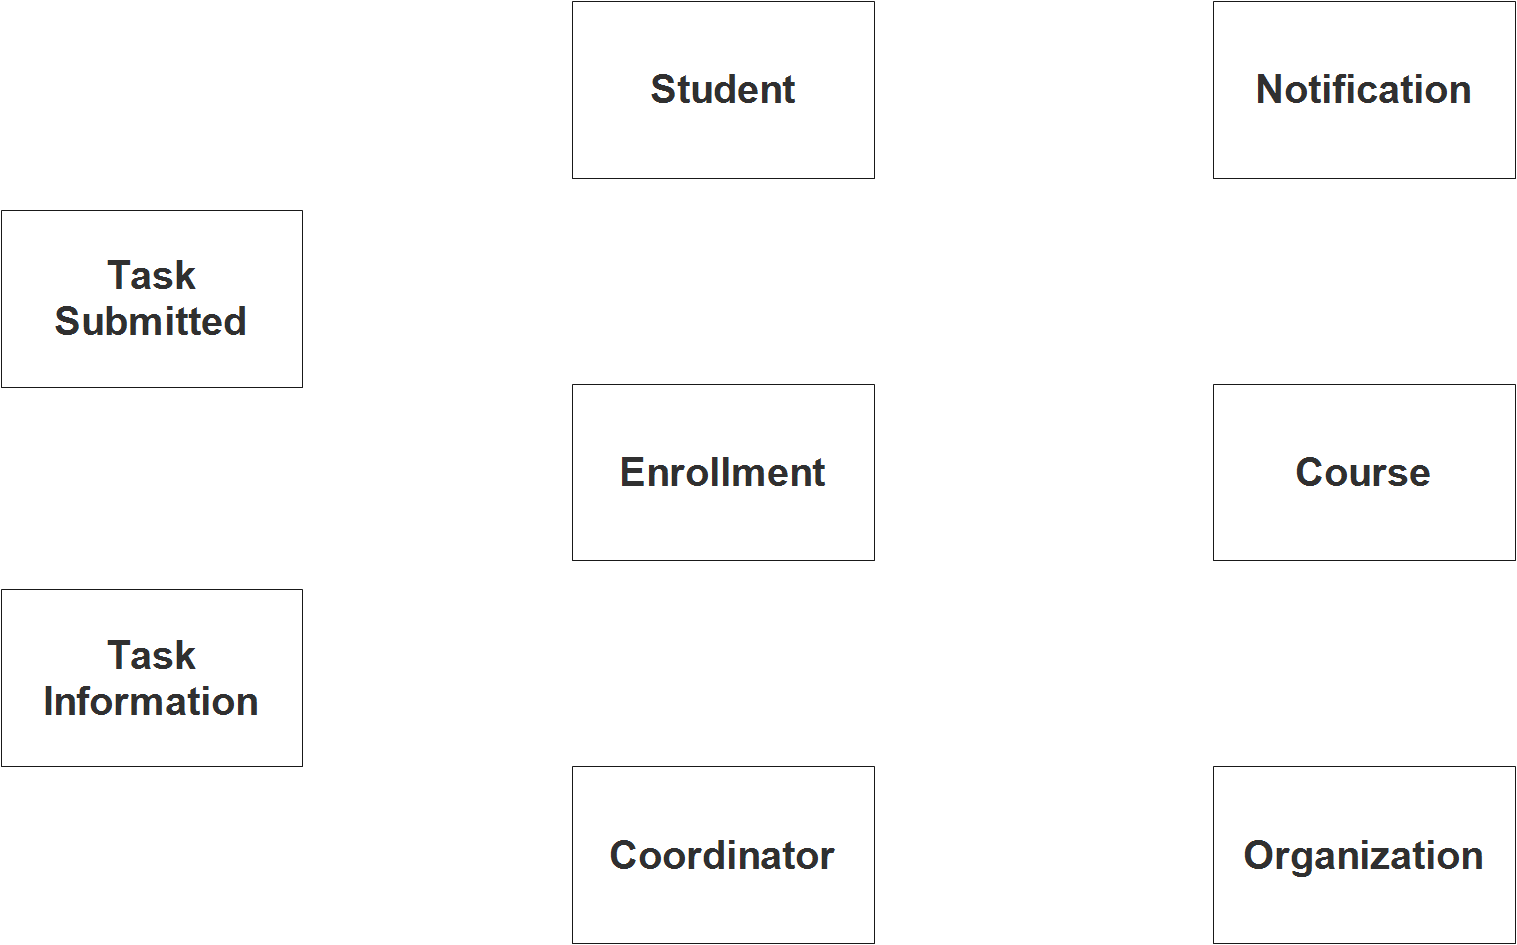 OJT Records Monitoring System ER Diagram - Step 1 Identify Entities